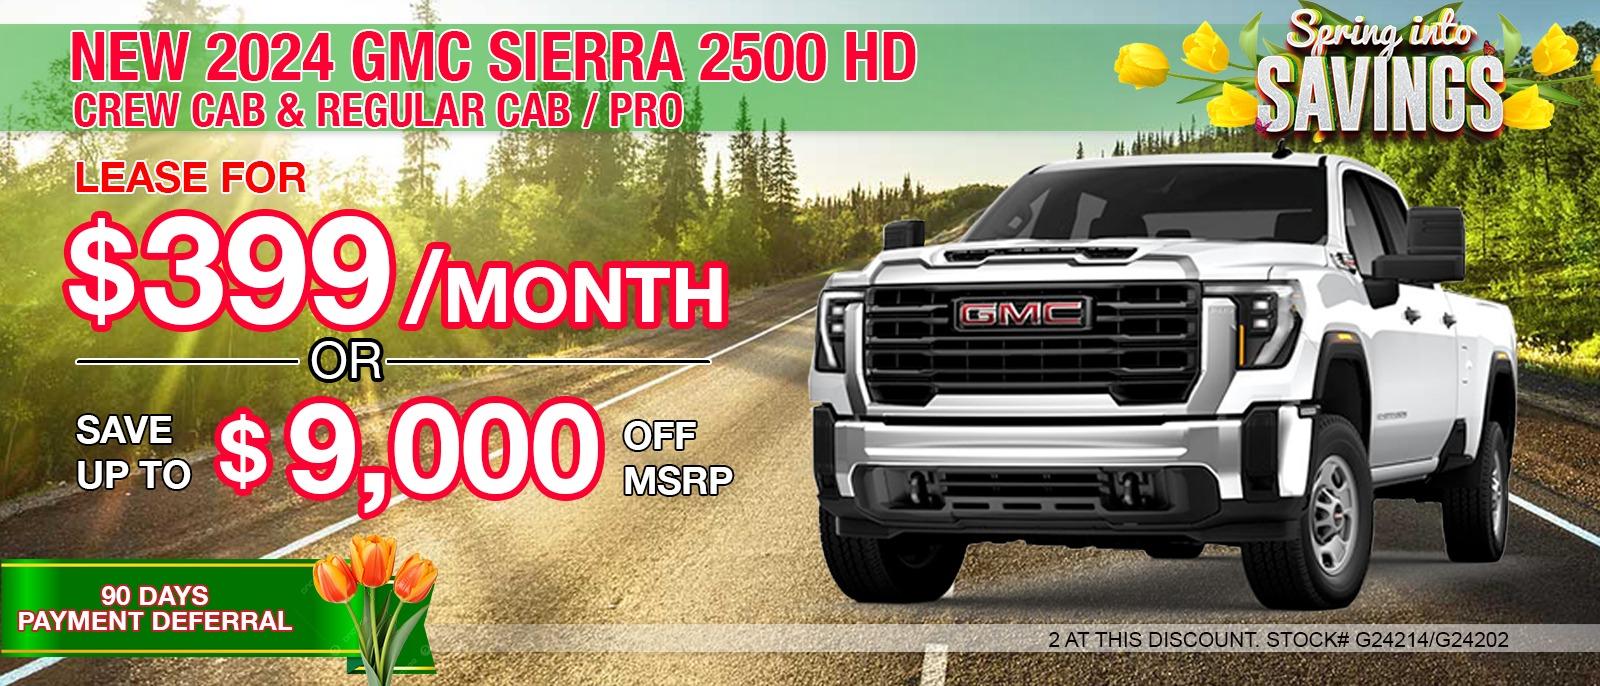 NEW 2024 GMC Sierra 2500 HD Crew Cab & Regular Cab / PRO. Your Net Savings After All Offers save up to $9,000